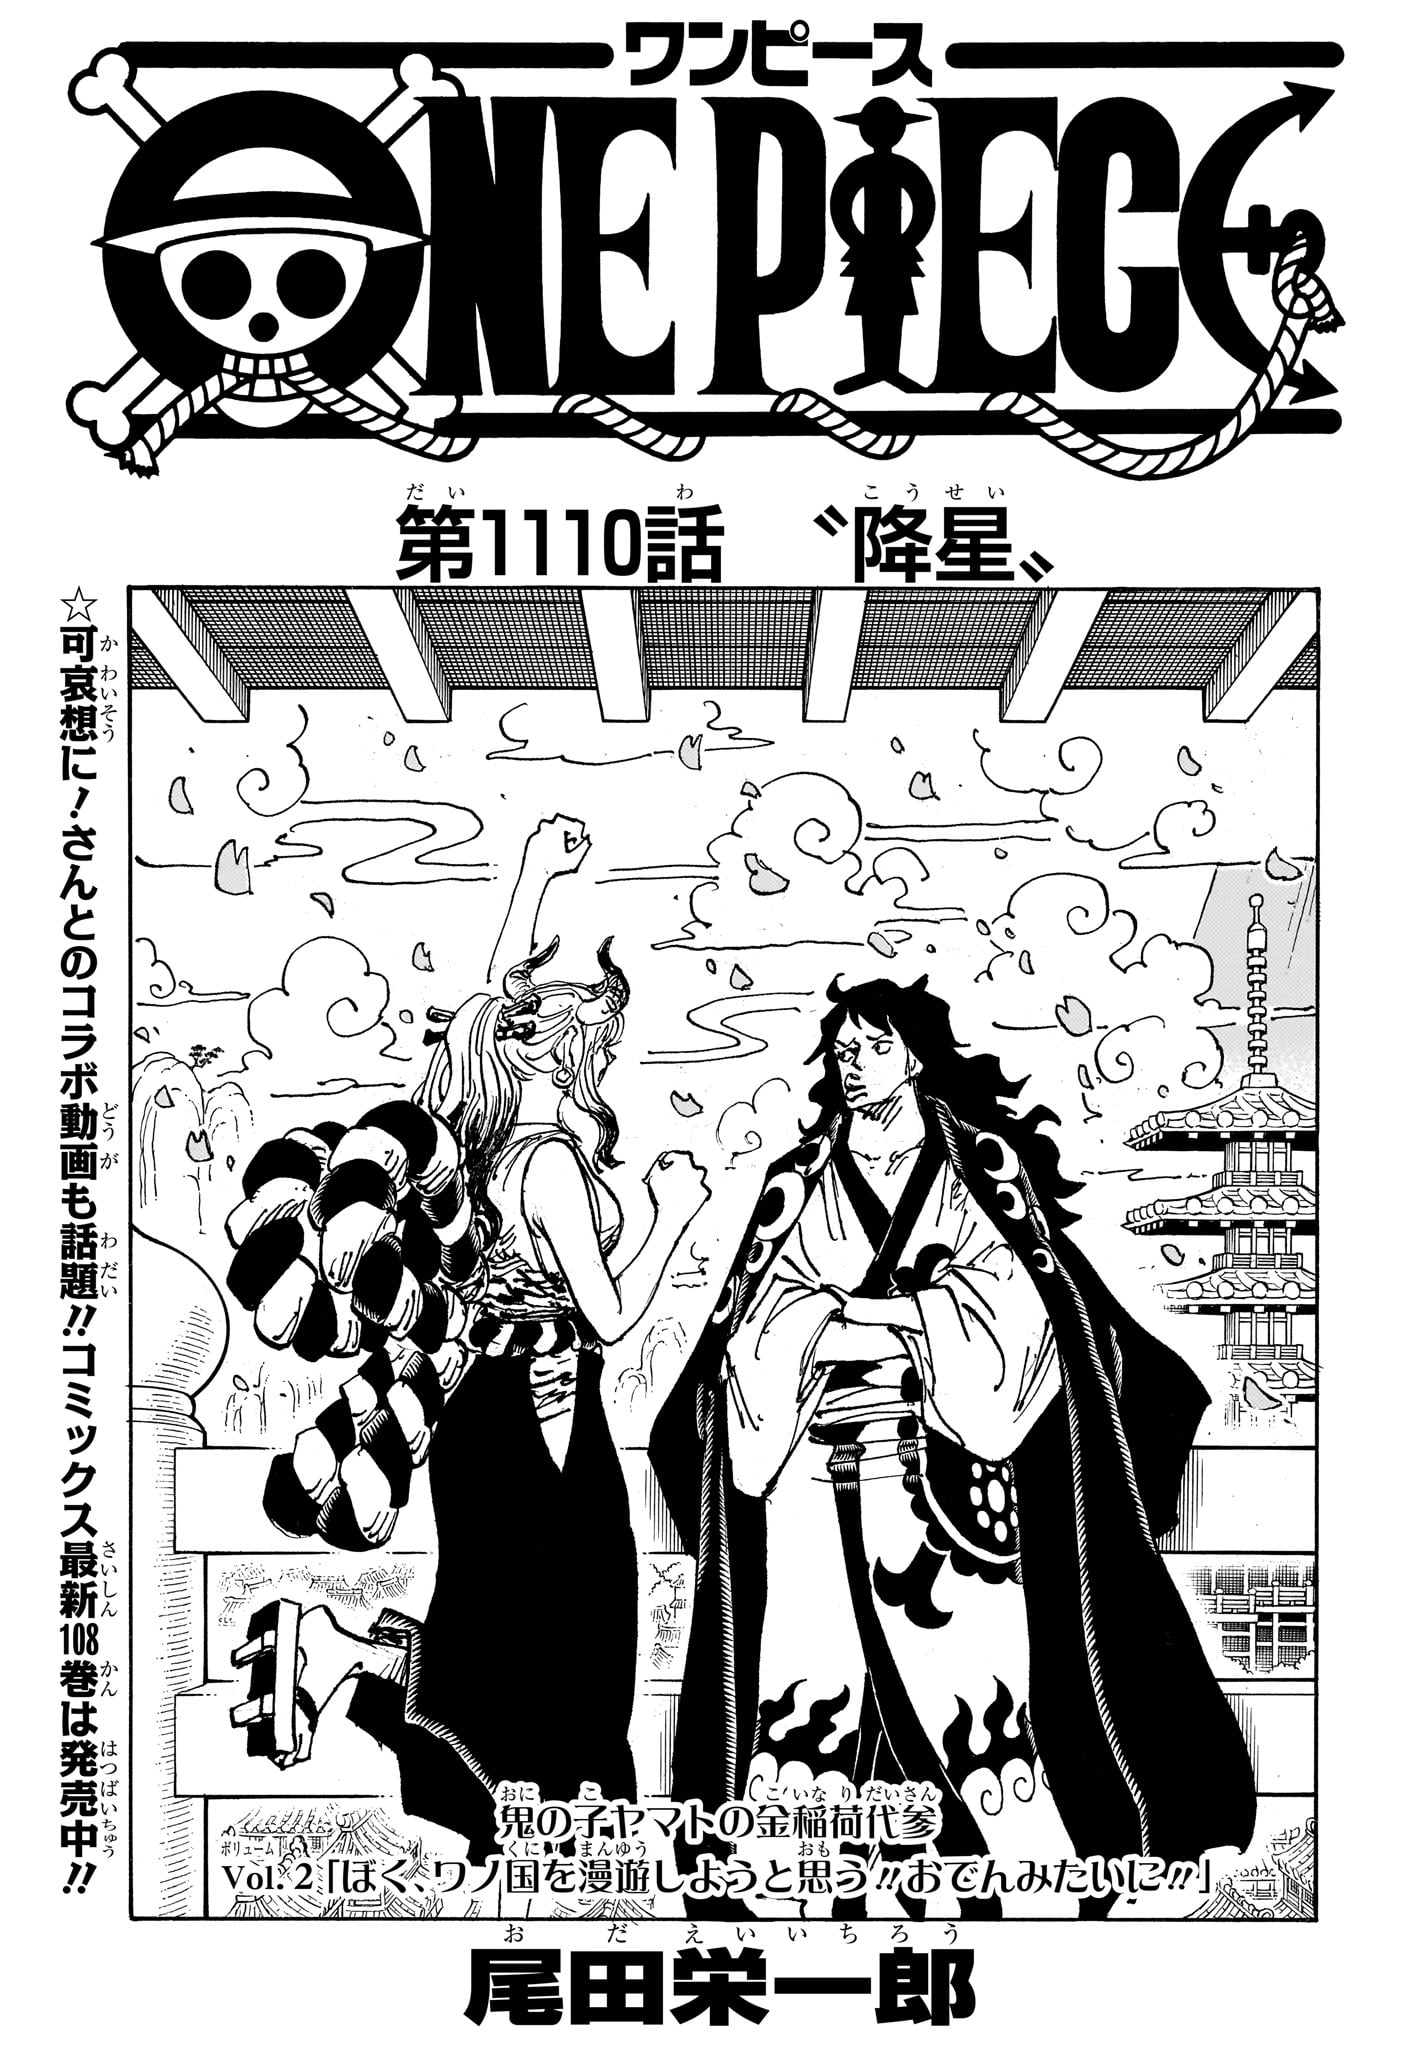 One Piece - Chapter 1110 - Page 1